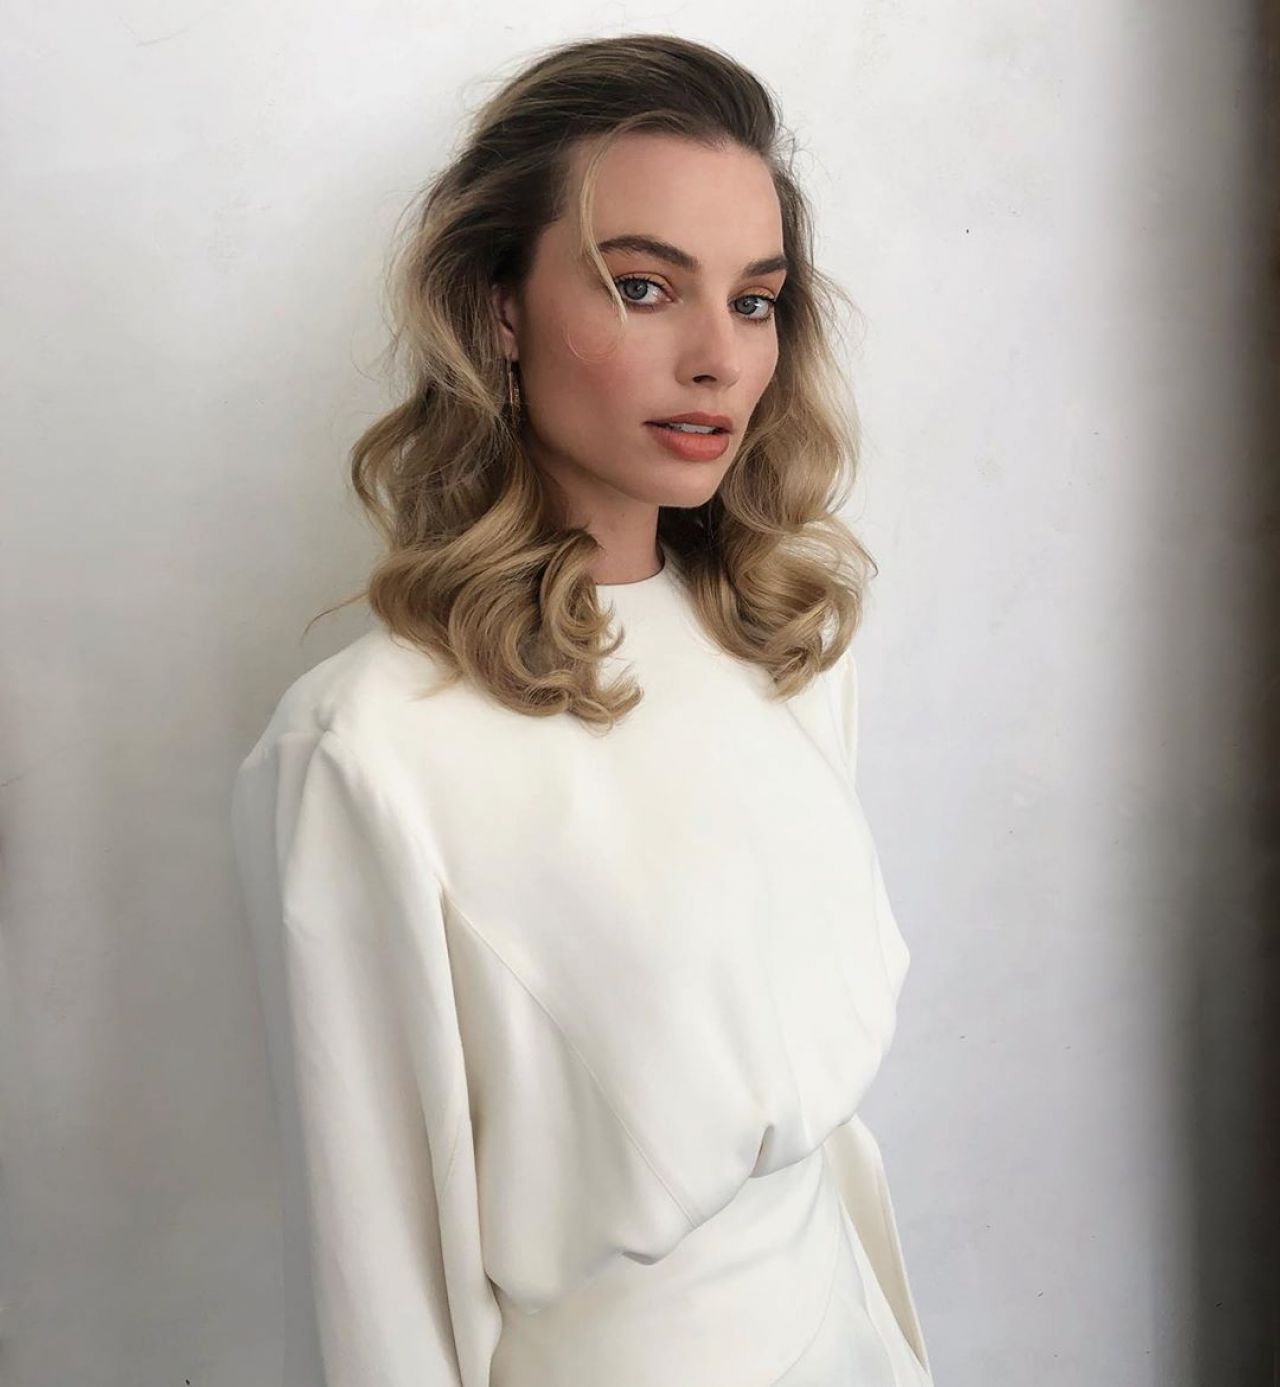 https://celebmafia.com/wp-content/uploads/2019/07/margot-robbie-once-upon-a-time-in-hollywood-press-portraits-july-2019-0.jpg